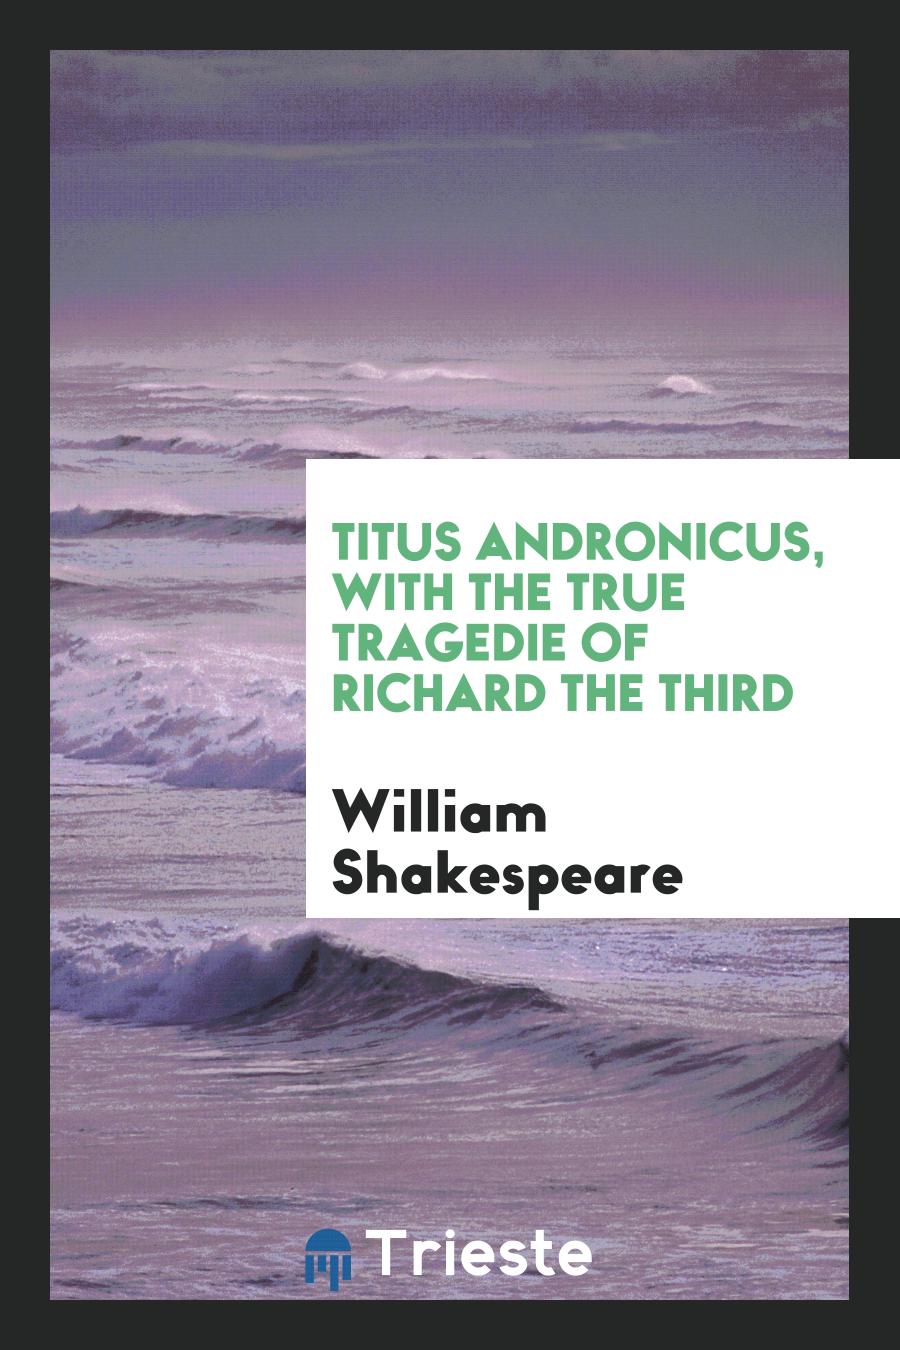 Titus Andronicus, with The true tragedie of Richard the Third